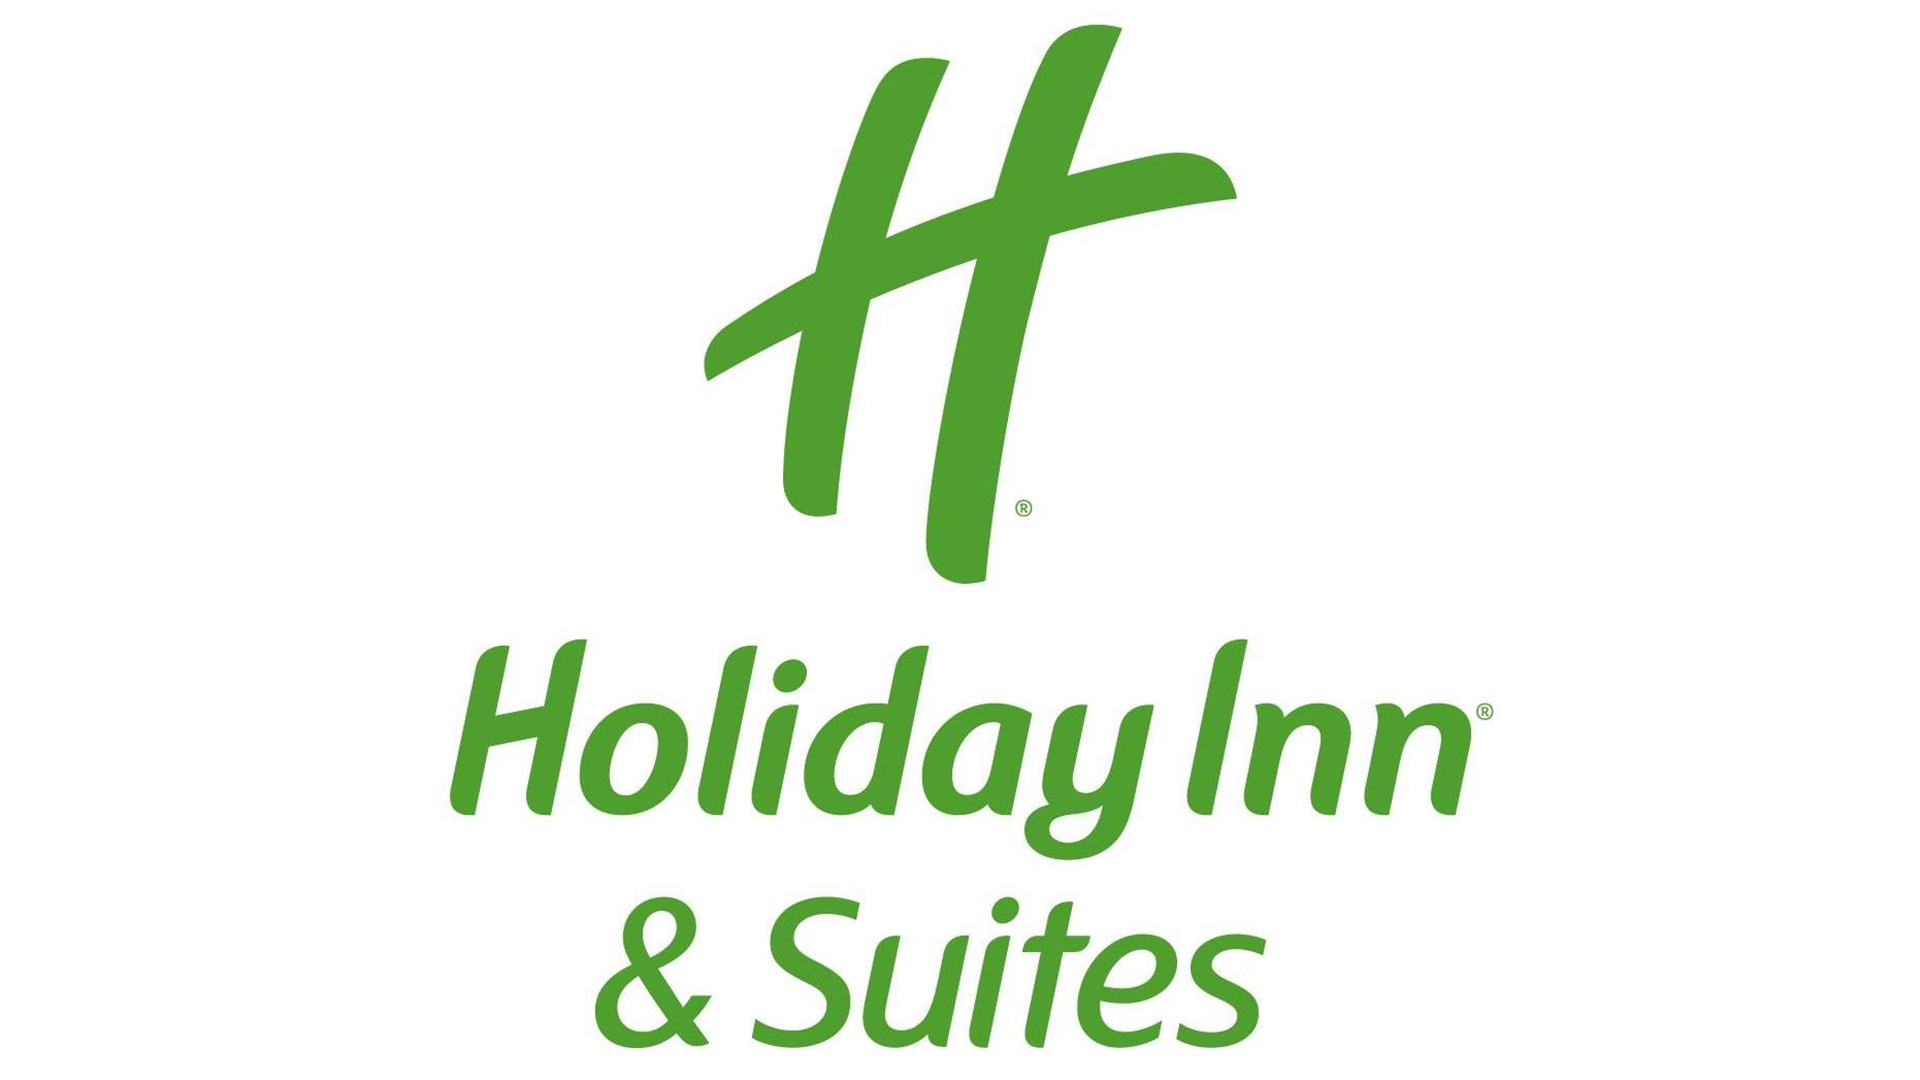 holiday inn.png